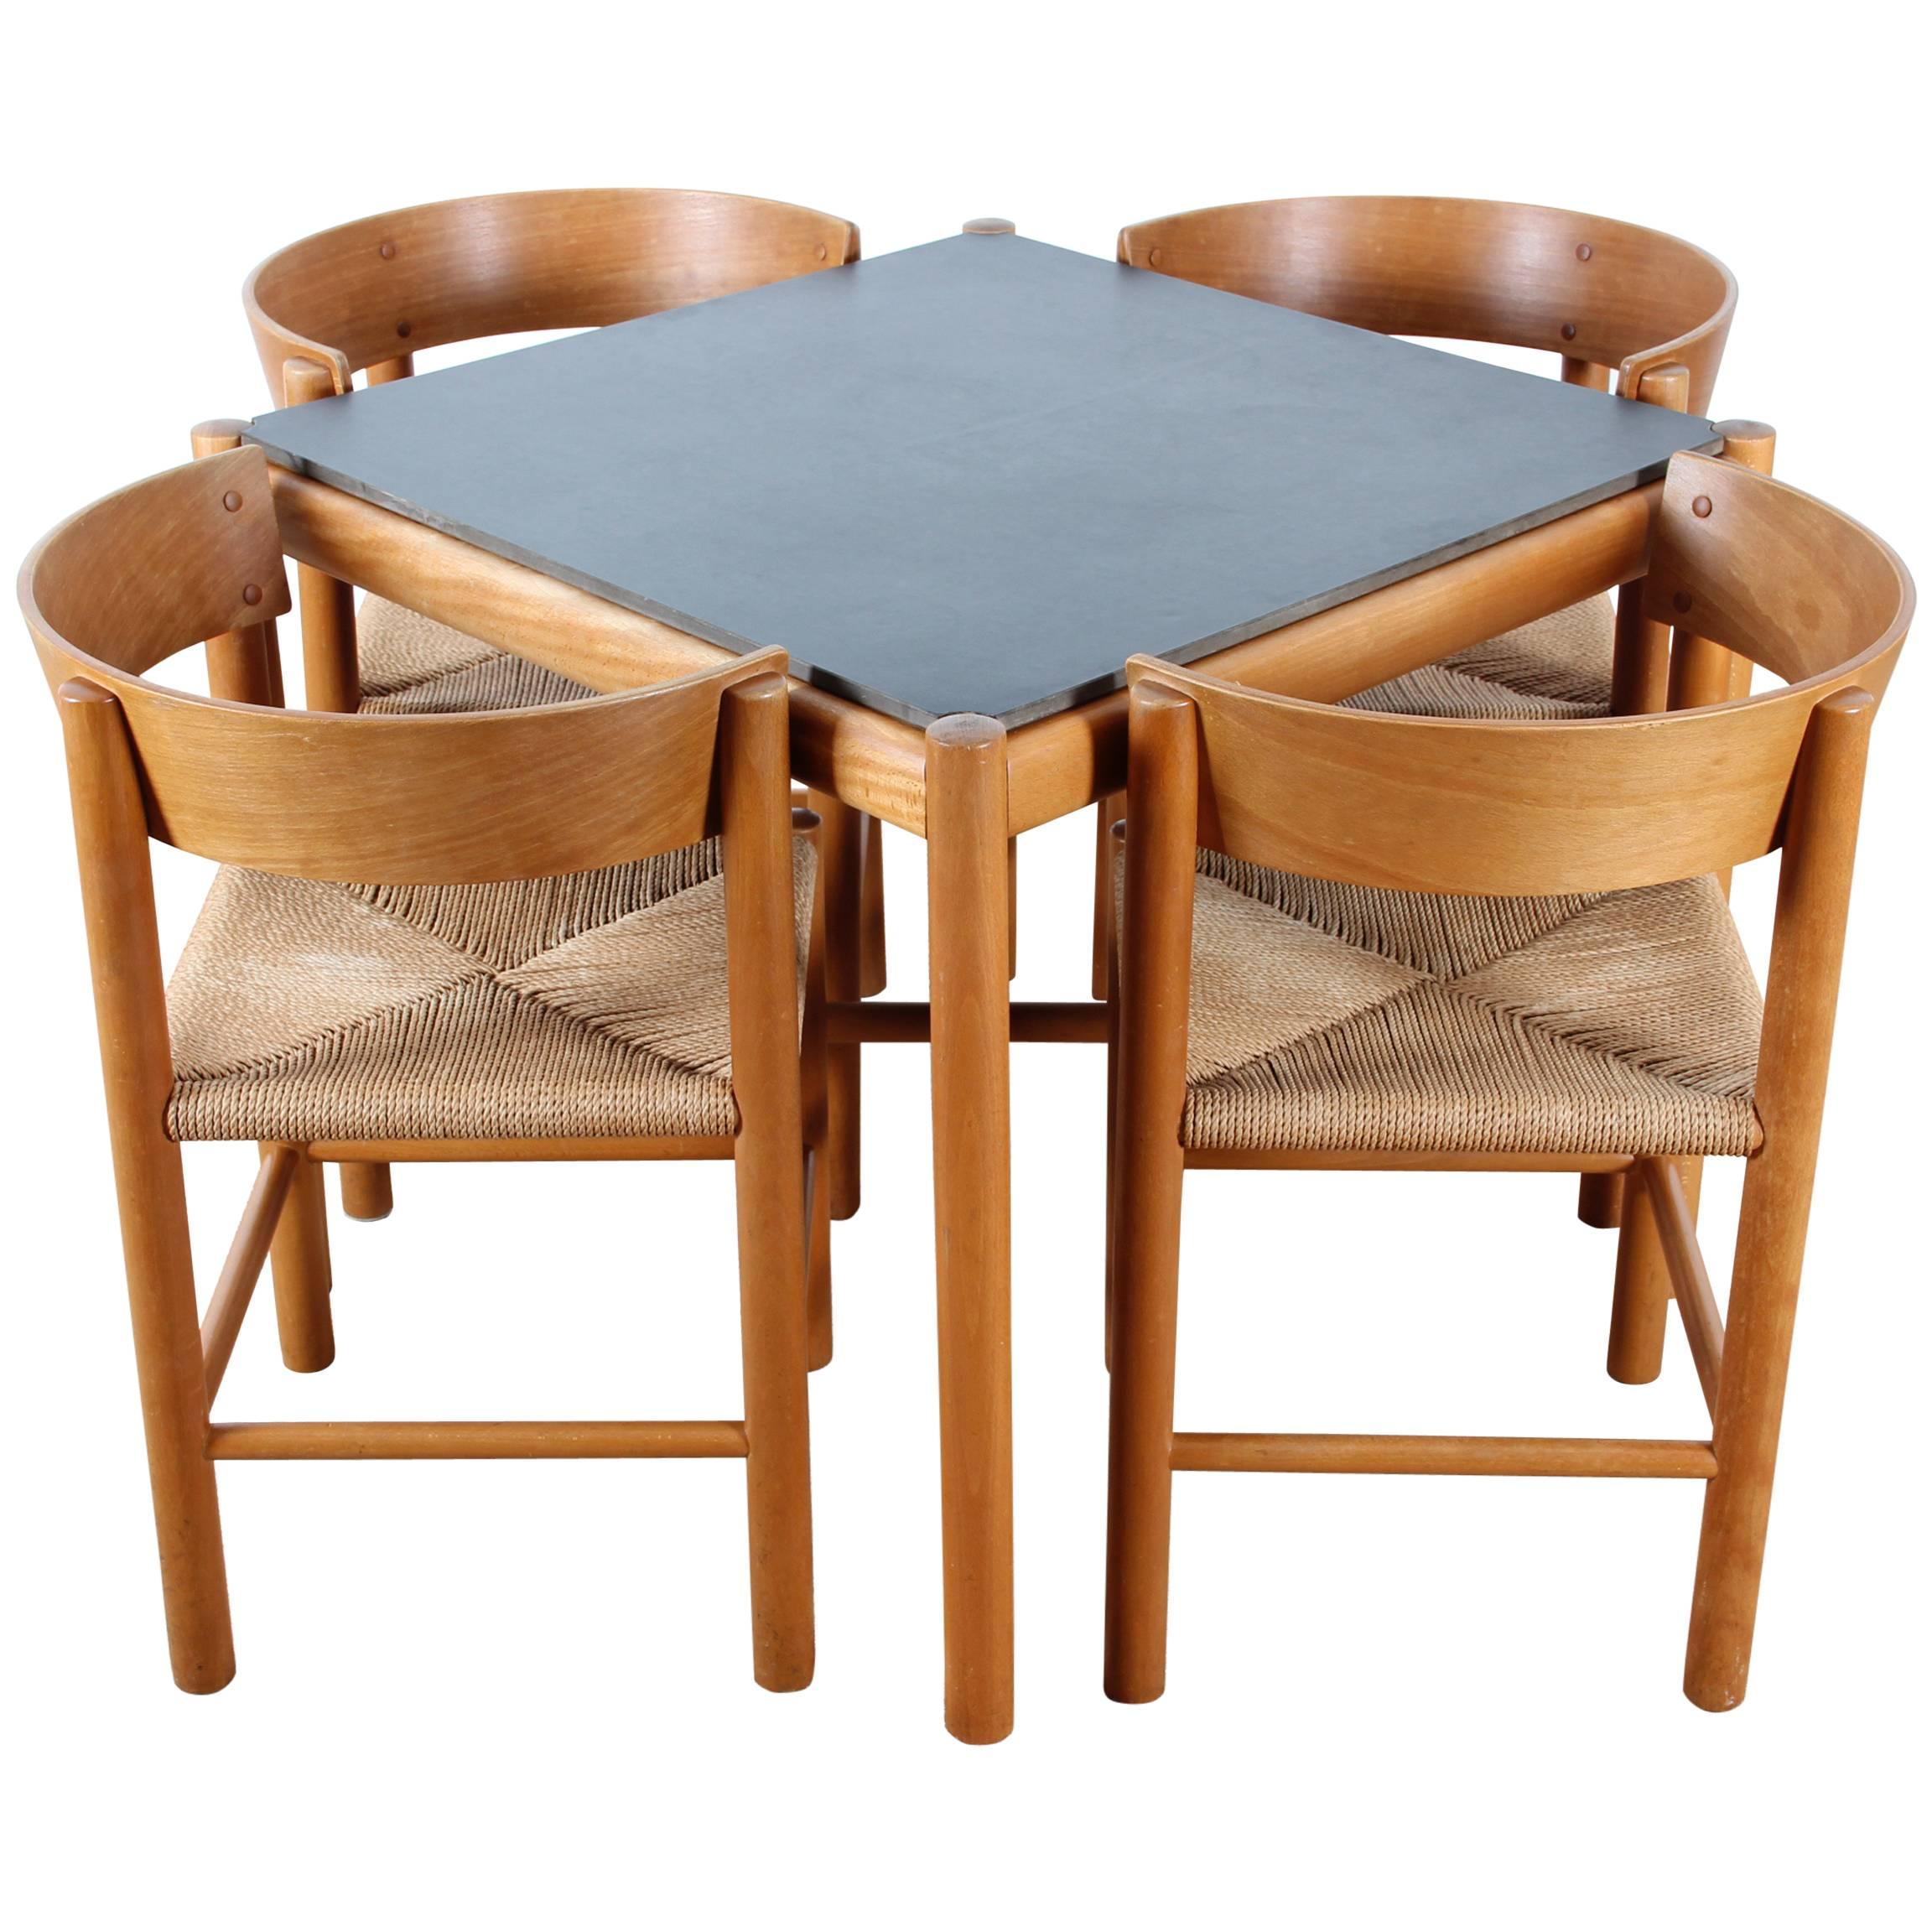 Set of Dining Table and Four Chairs, Model FH4216 & FH4226